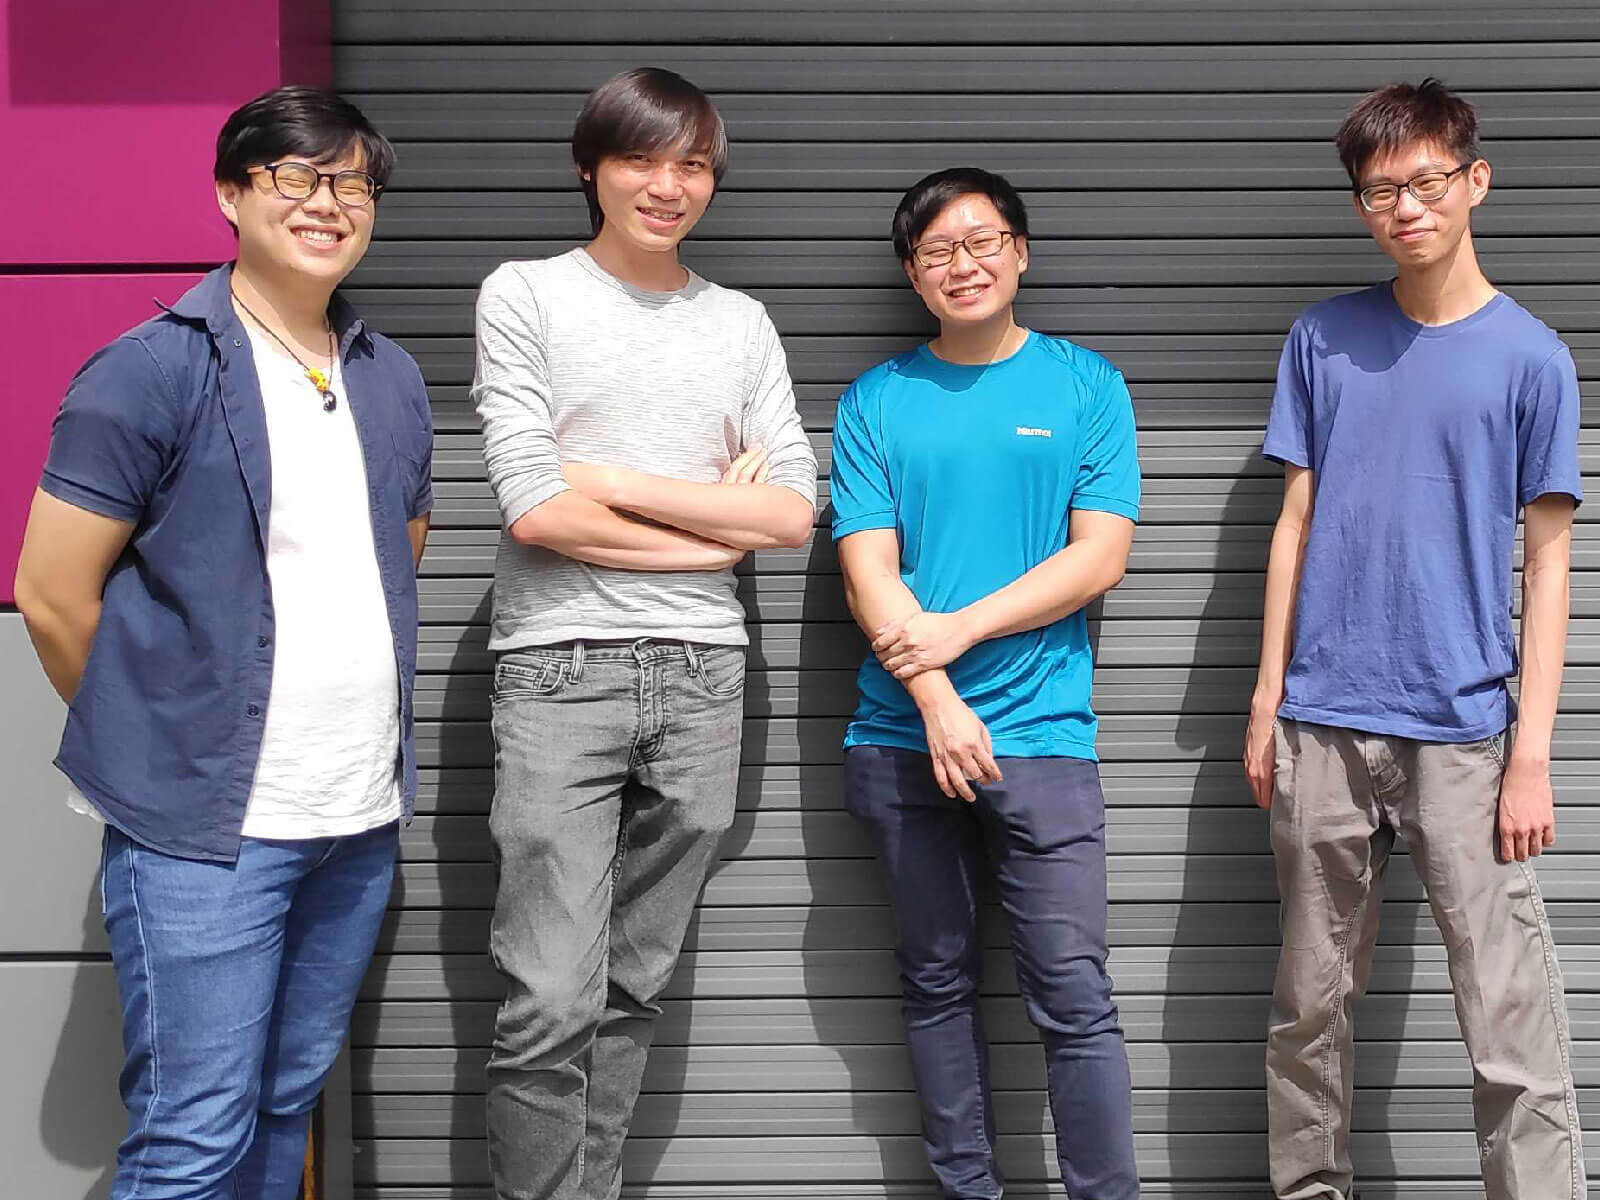 Four DigiPen (Singapore) graduates contribute their computer science expertise to advance the field of autonomous vehicle technologies at Motional